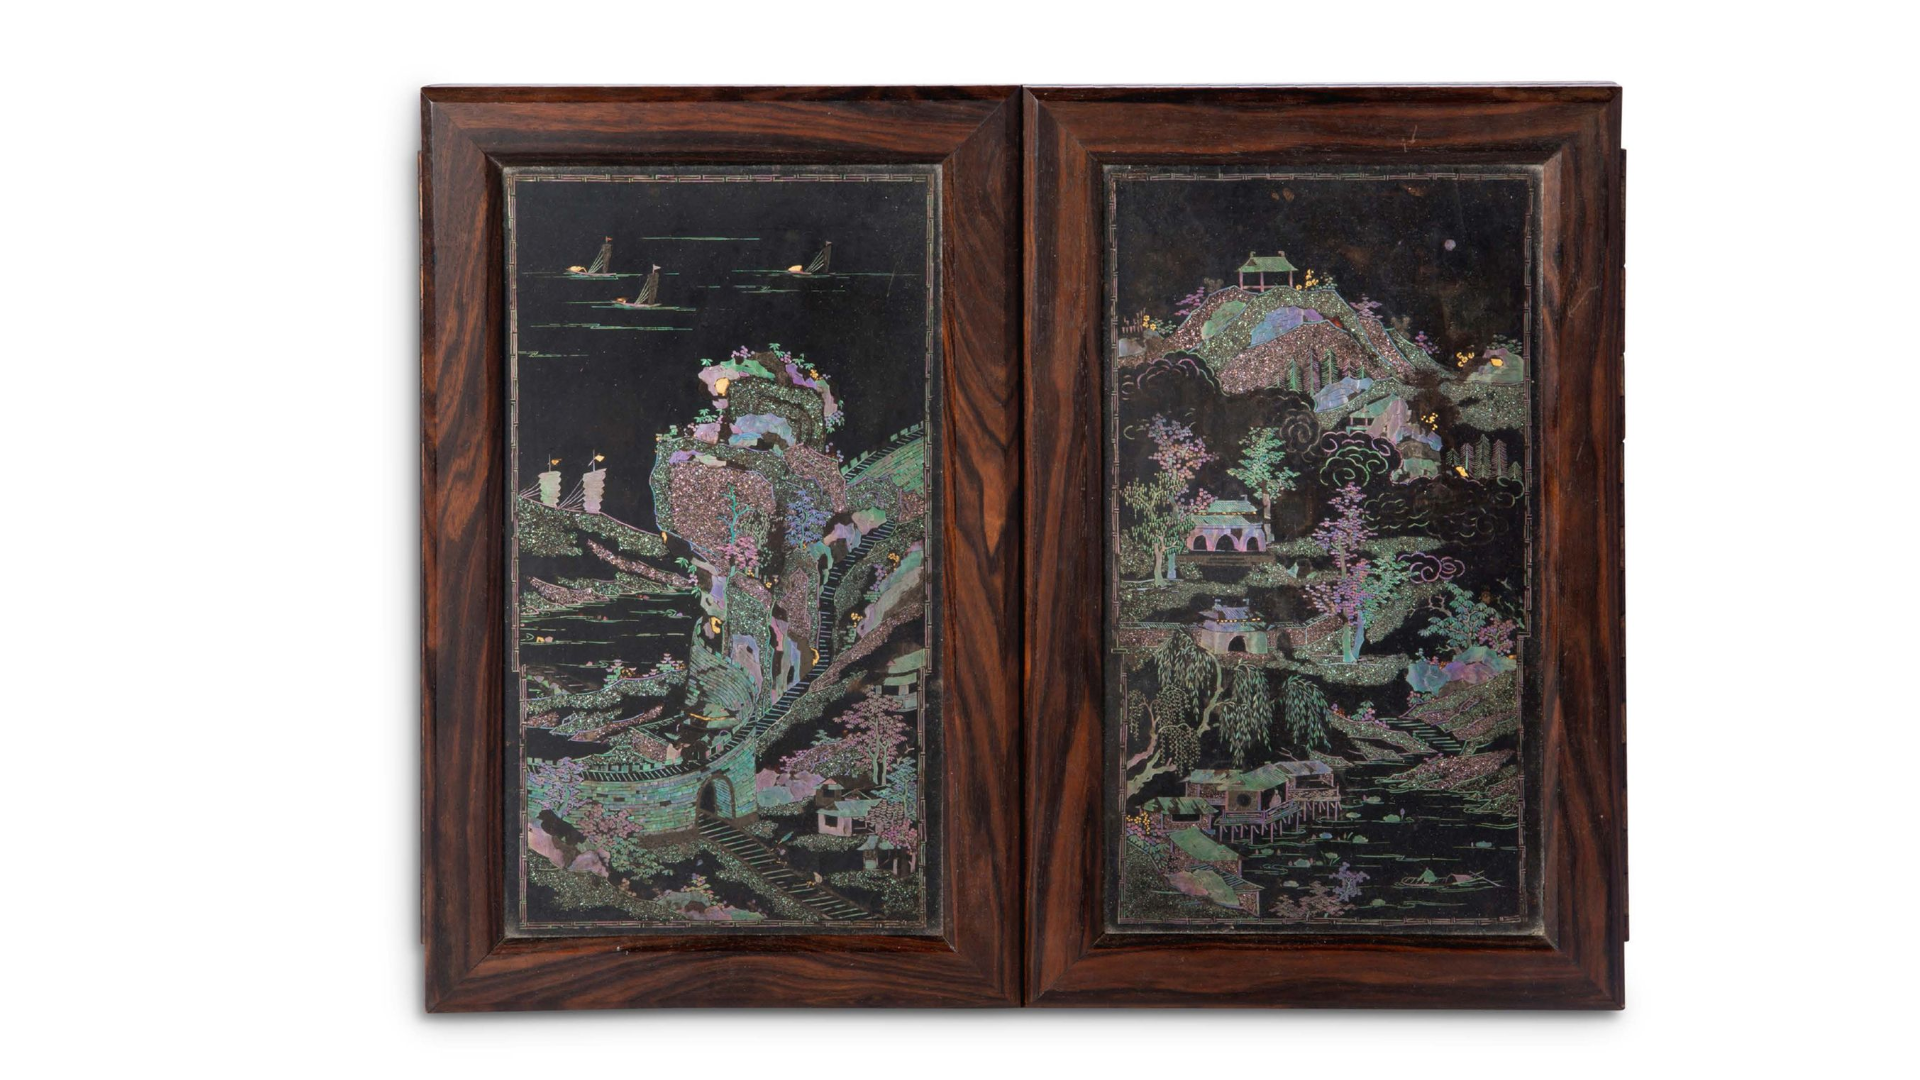 An 18th c pair of mother-of-pearl inlaid laquer table screens Qing dynasty